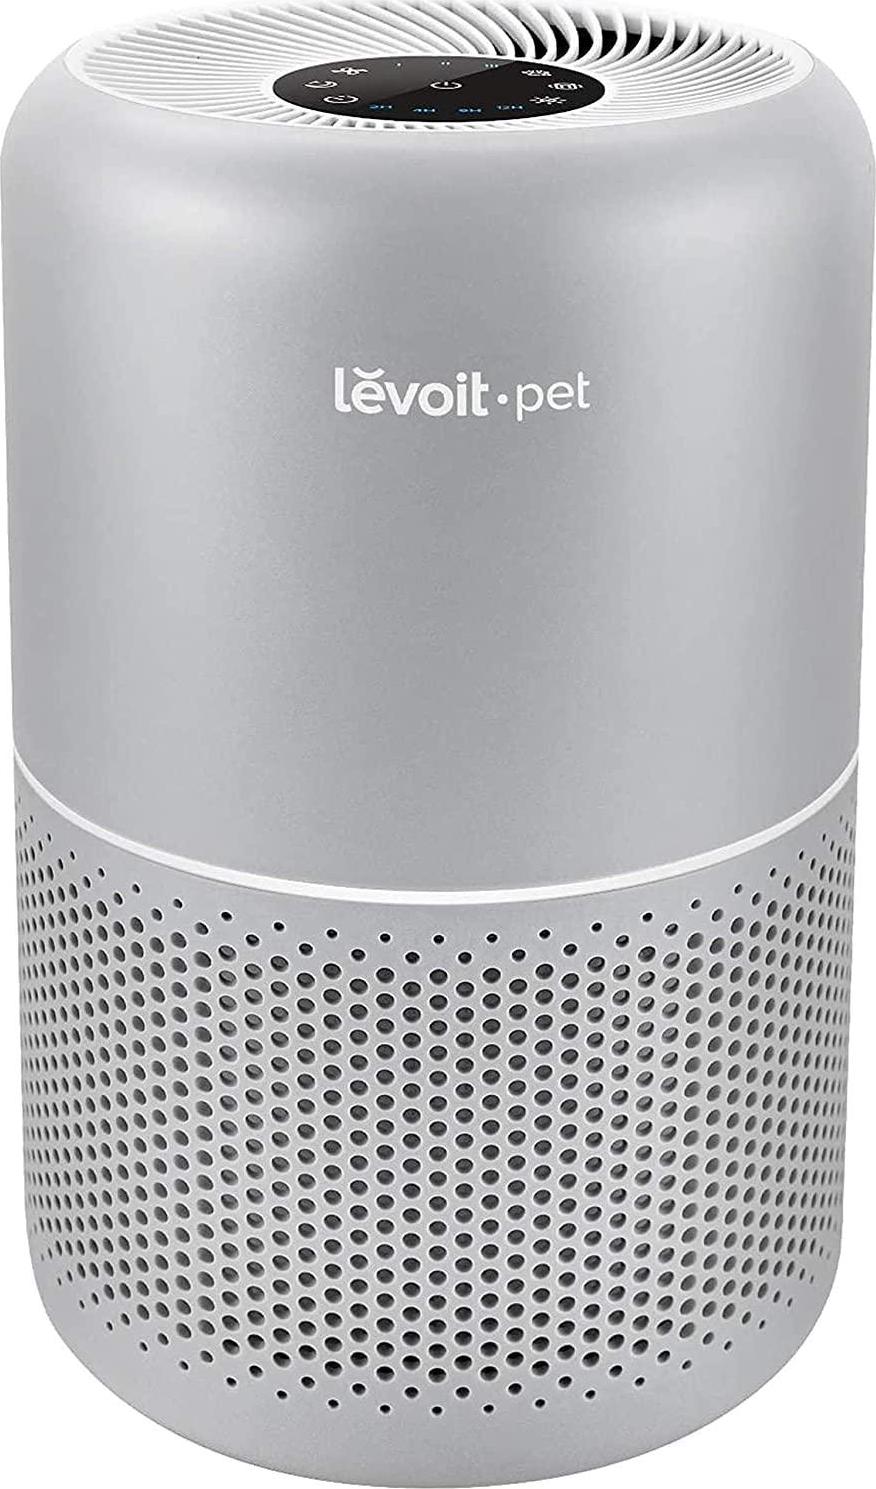 Levoit, Levoit Air Purifiers for Home Allergies and Pet Hair, H13 True HEPA Air Filter for Bedroom, 24dB Filtration System with ARC Formula, Remove 99.97% Smells Odours Pollen Smoke Dust Mould, Core P350